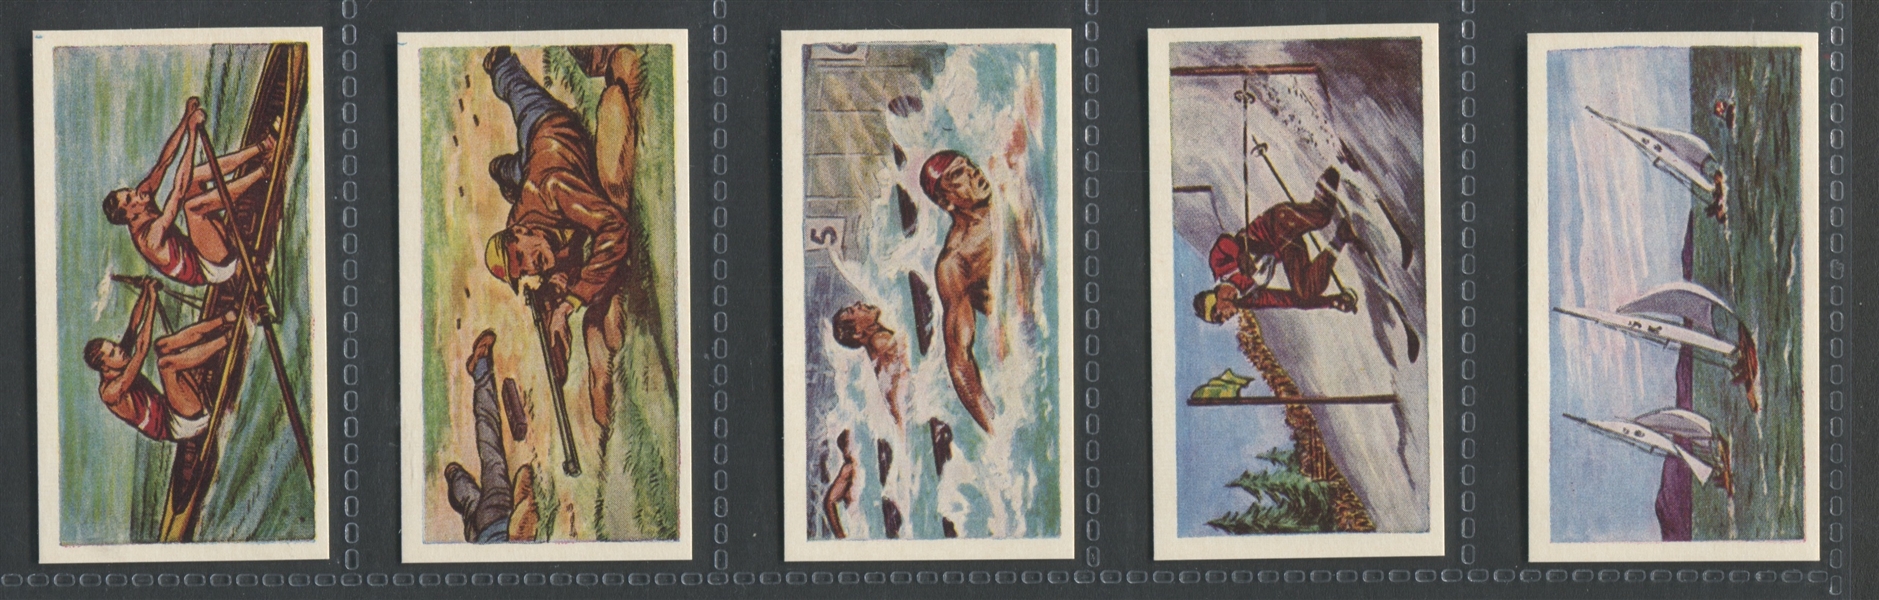 1959 Comet Sweets Olympic Achievements Complete Series 1 Set of (25) Cards